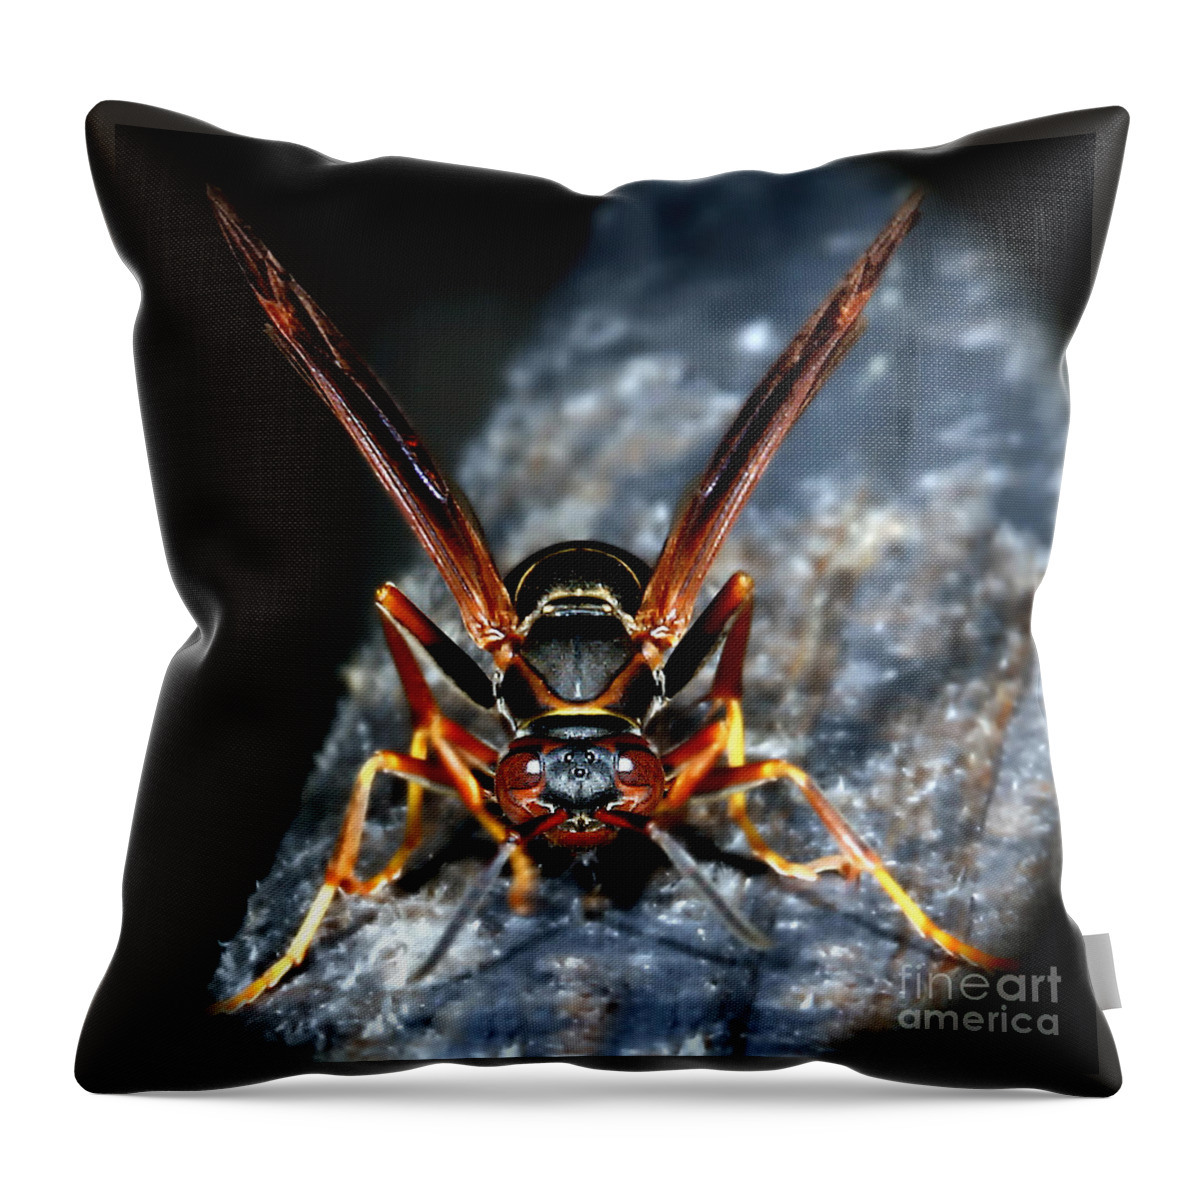 Hornets Throw Pillow featuring the photograph Here's Looking At Me by Geoff Crego